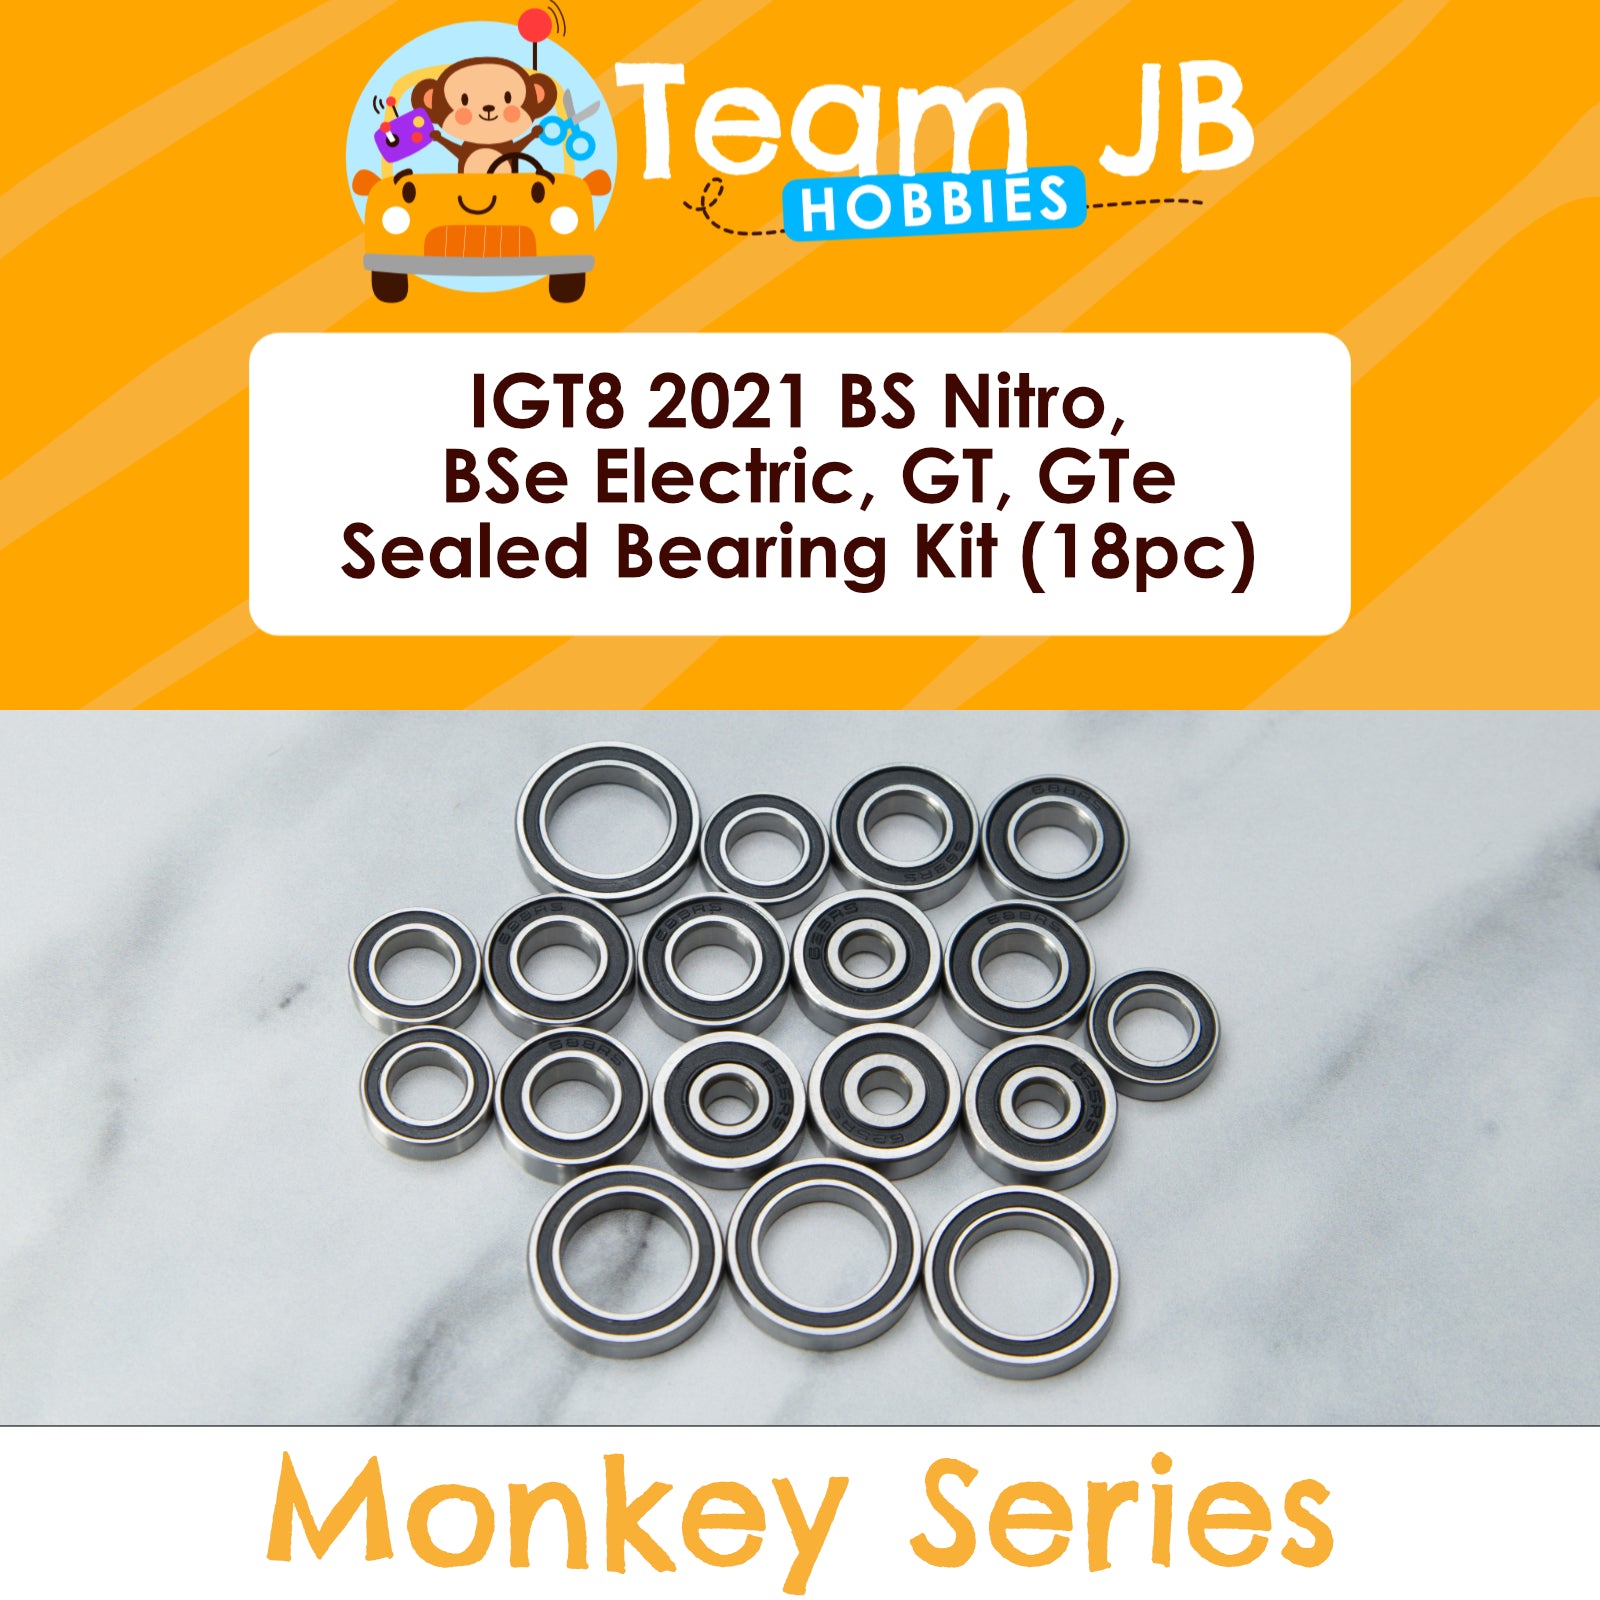 IGT8 2021 BS Nitro, BSe Electric, GT, GTe - Sealed Bearing Kit